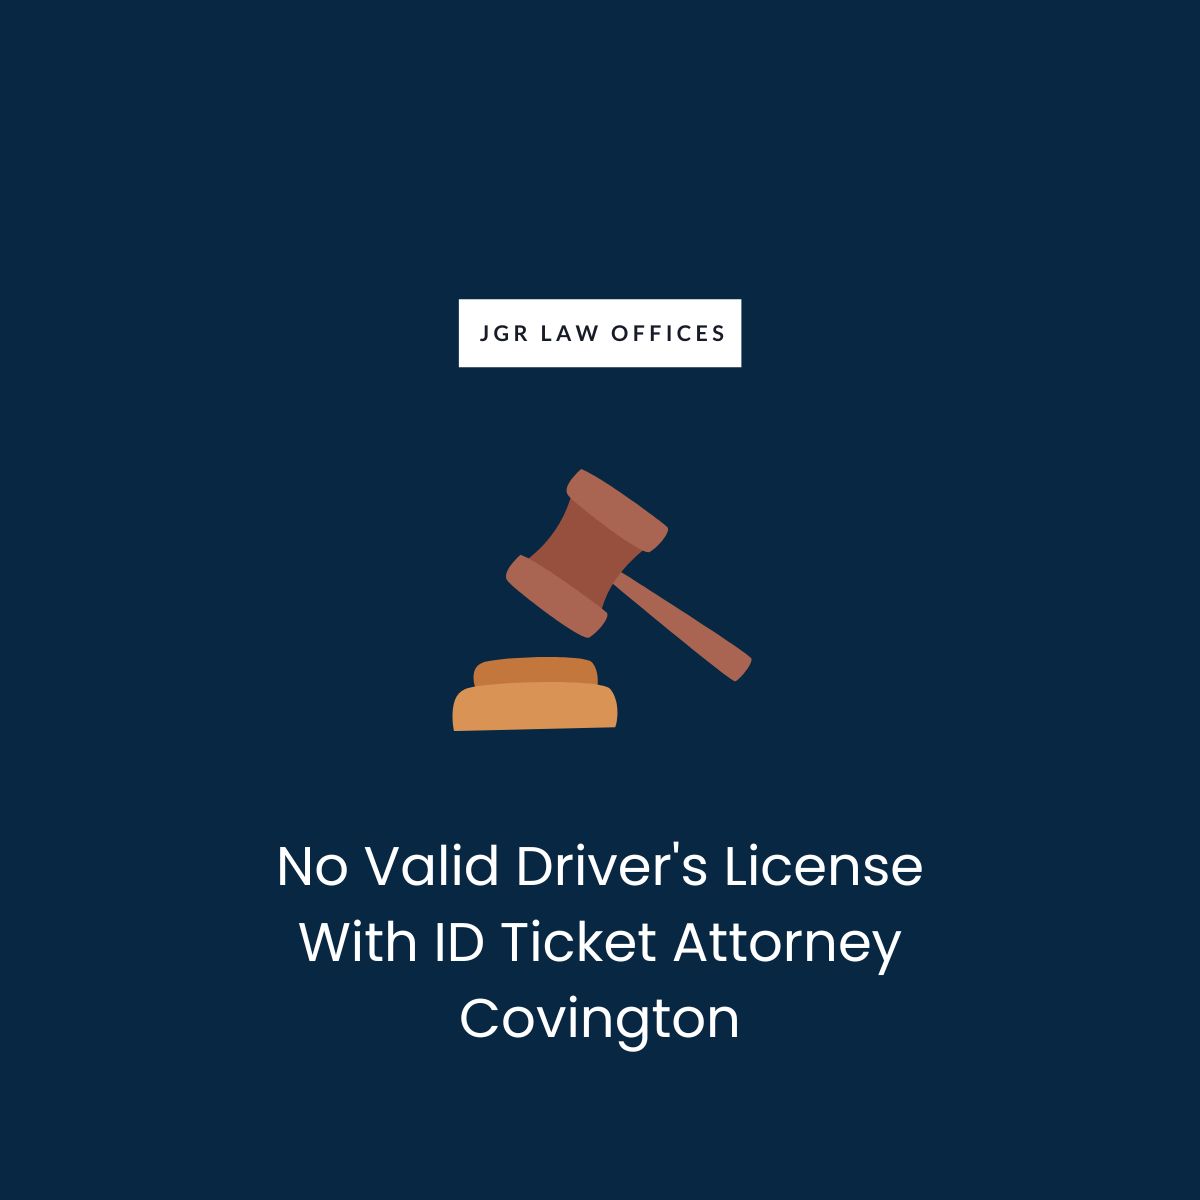 No Valid Driver's License With ID Ticket Attorney Covington